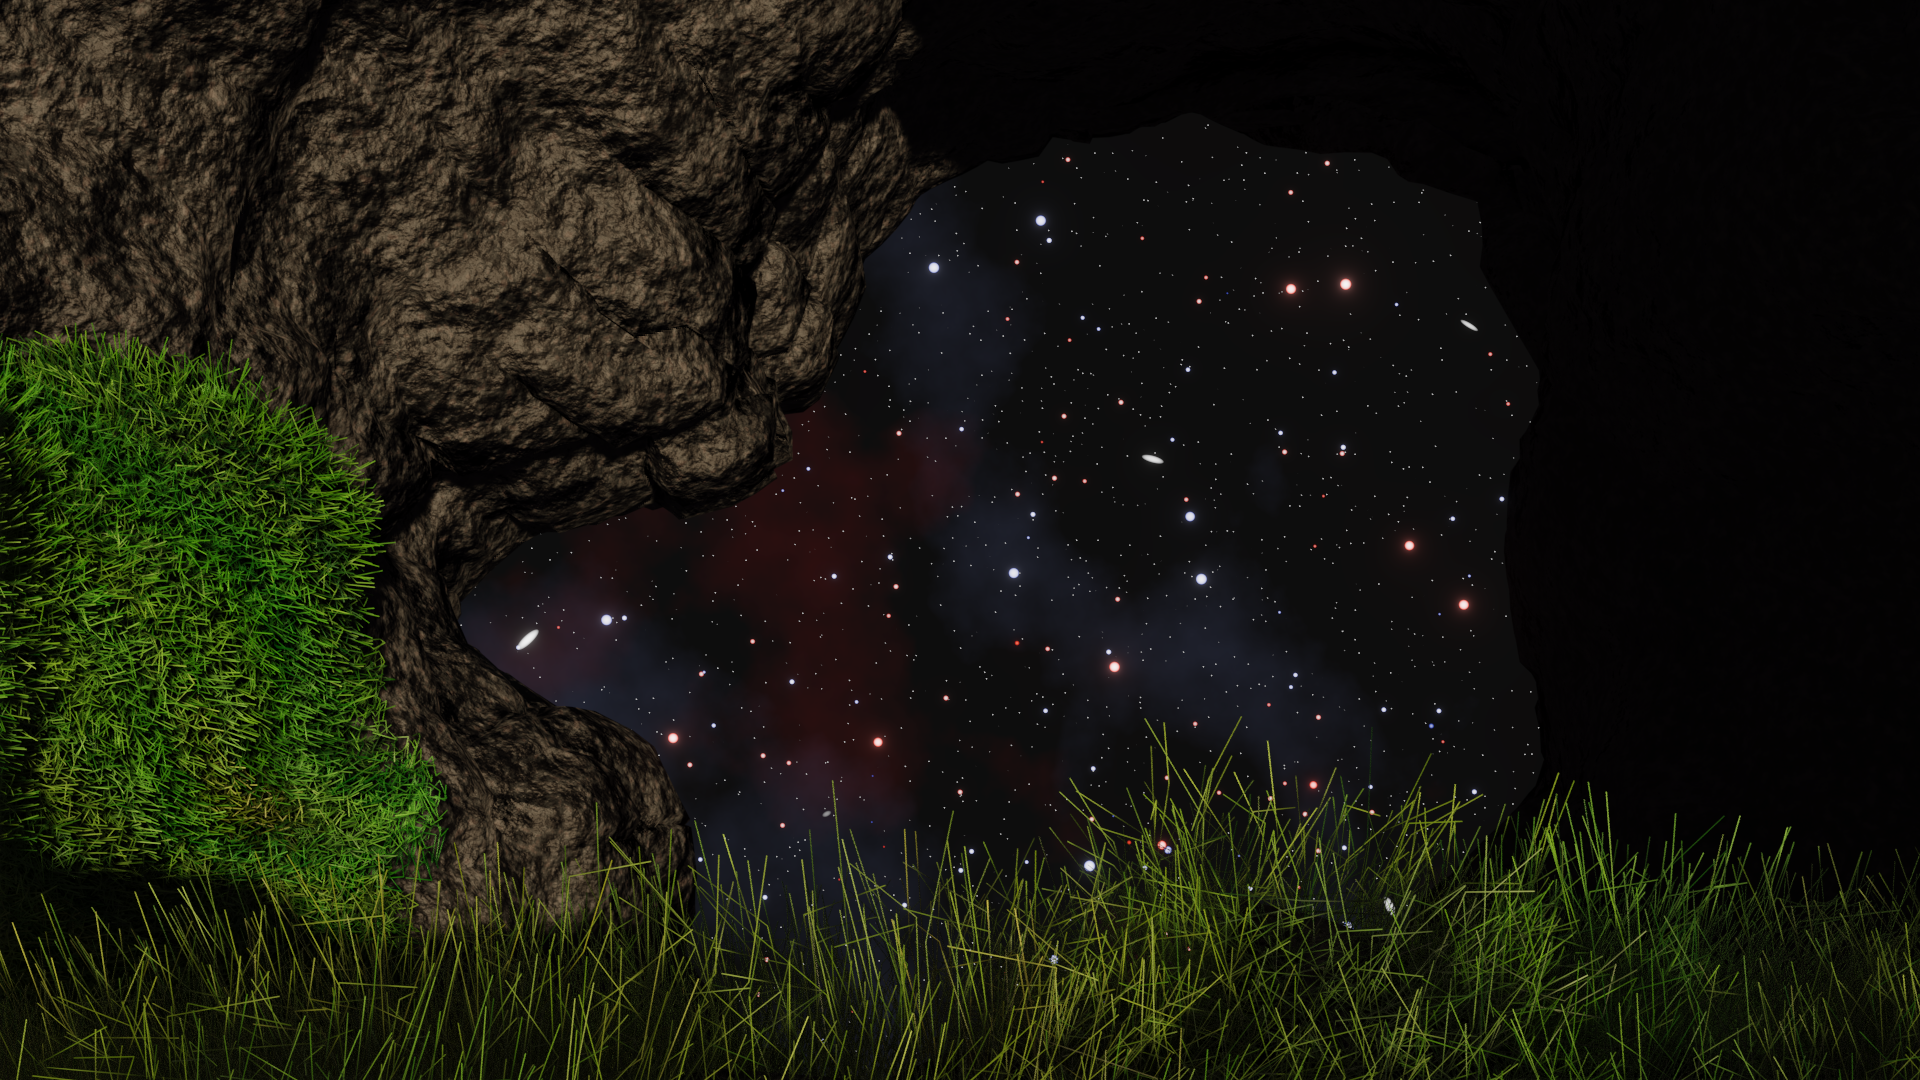 Scene with grass, rock and space preview image 3